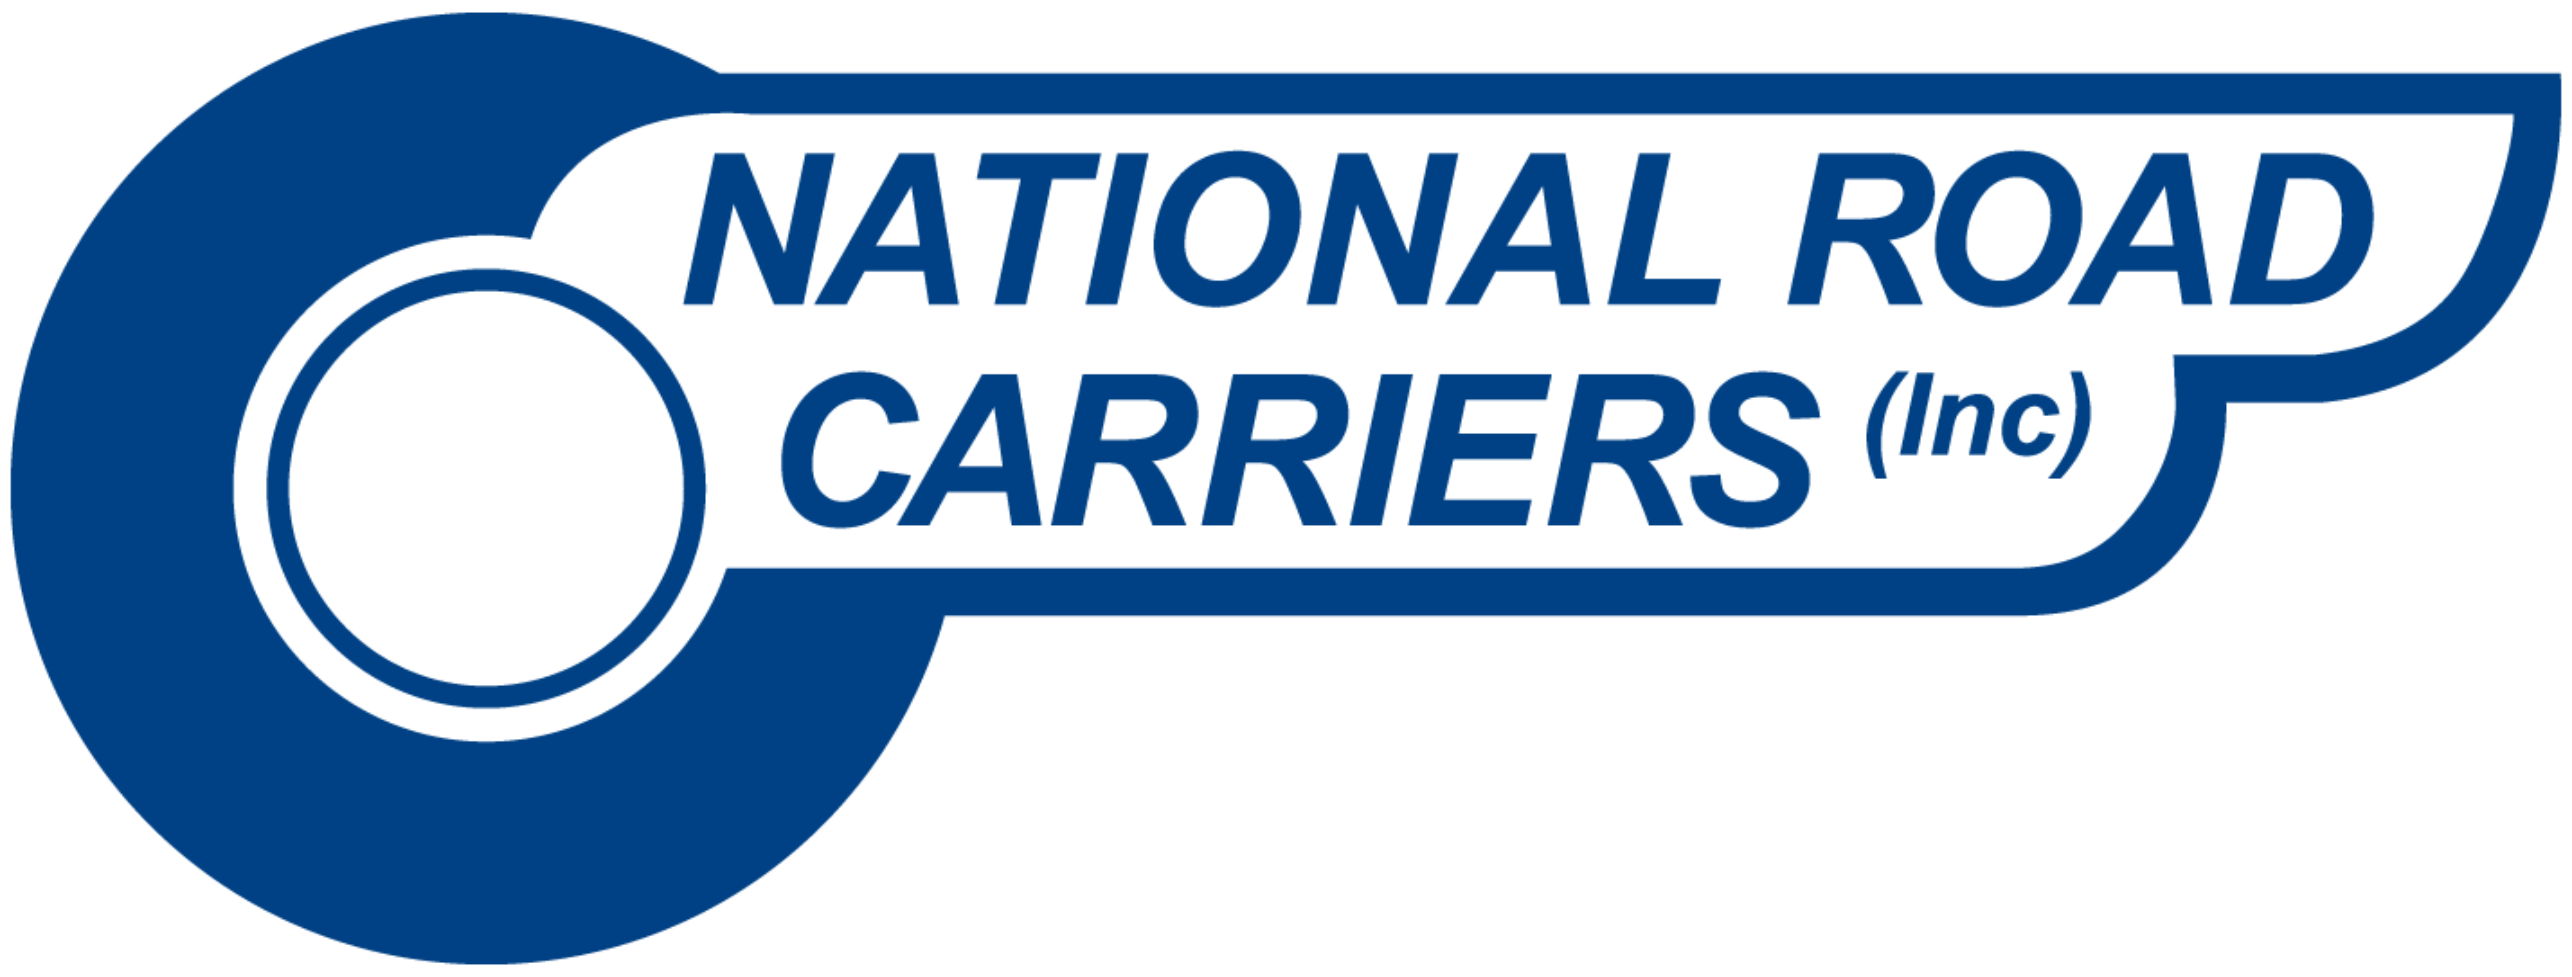 National Road Carriers (inc)